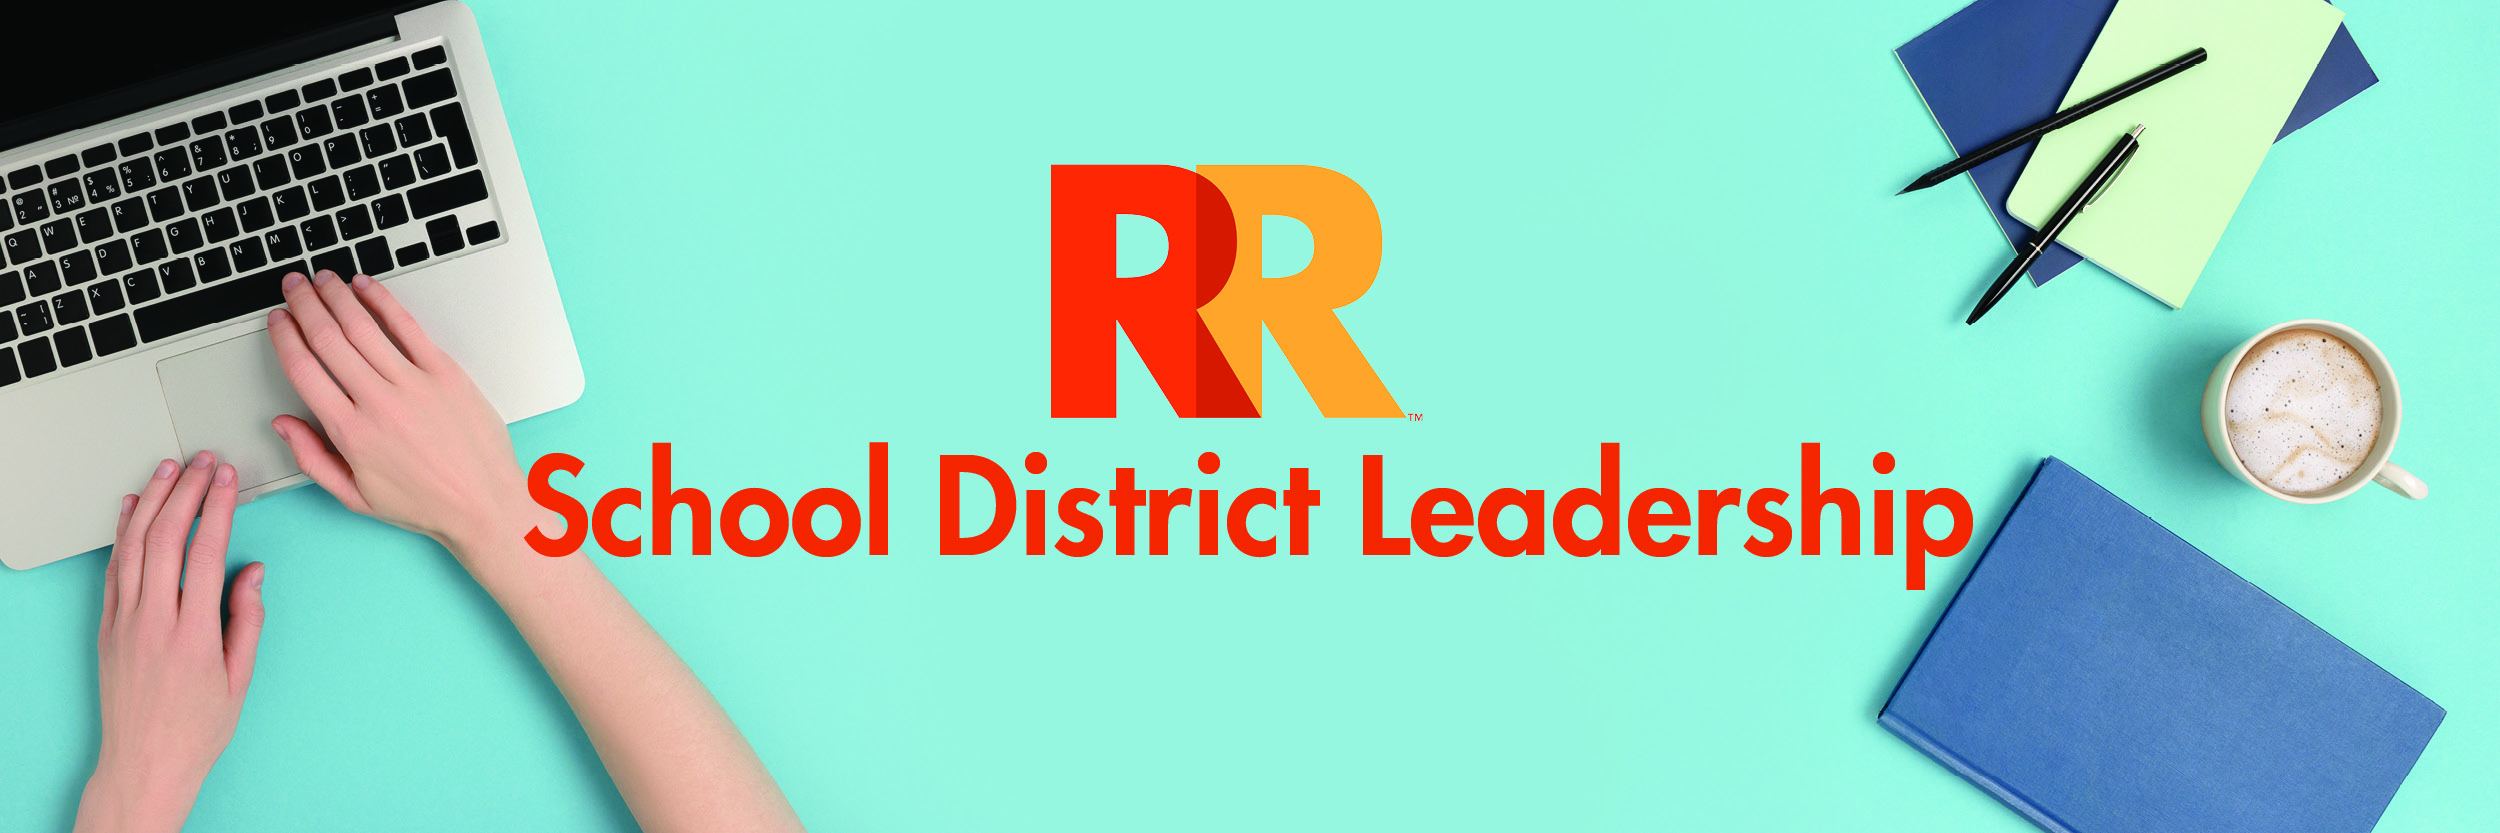 RRPS District Leadership Image with a computer pictured